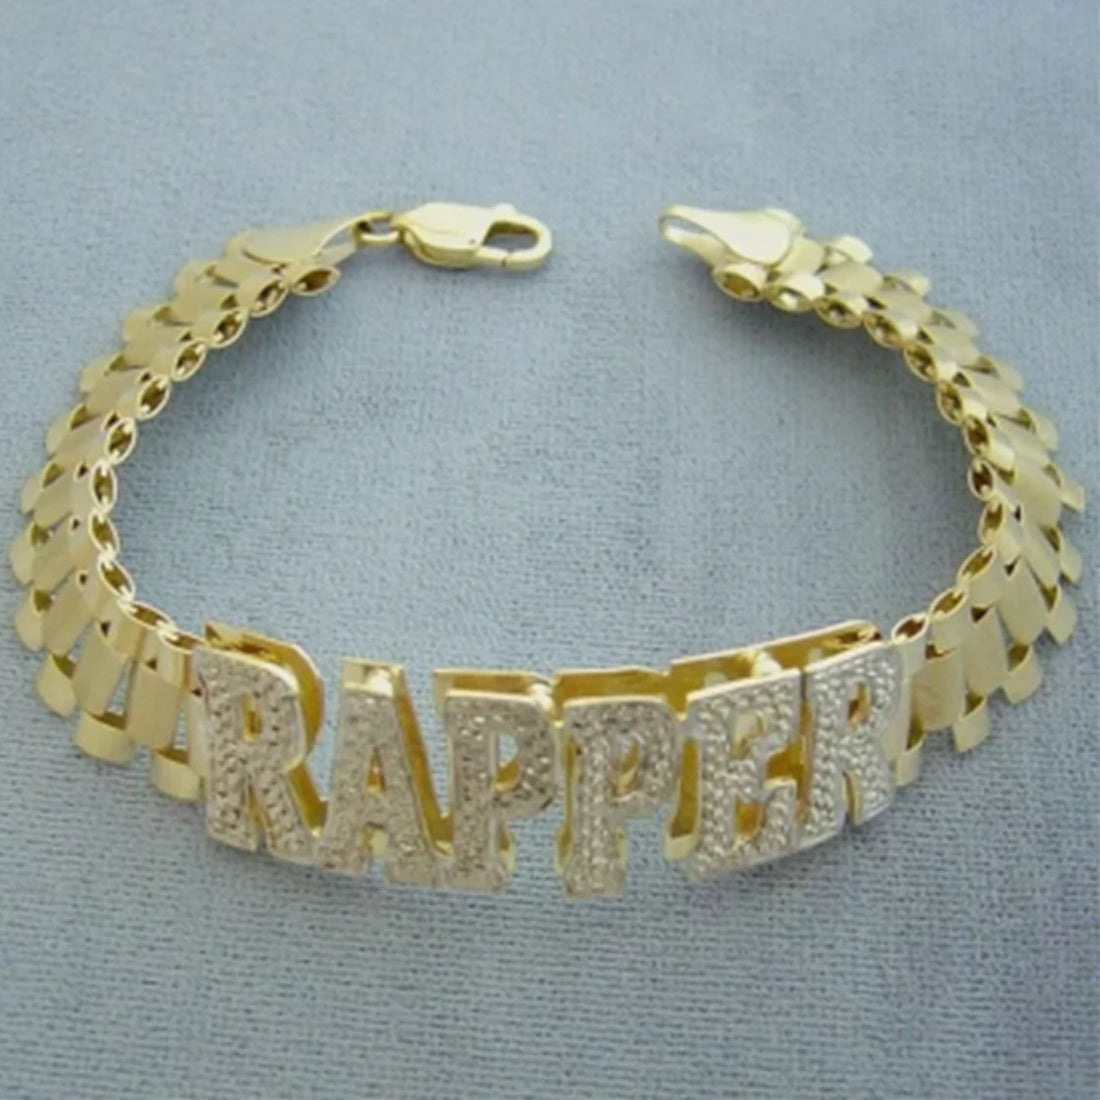 Two Tone Gold Personalized Name Bracelet 3D Custom Name Stainless Steel Jewelry Double Layer Watch Band Chain Gift - Fashionqueene.com